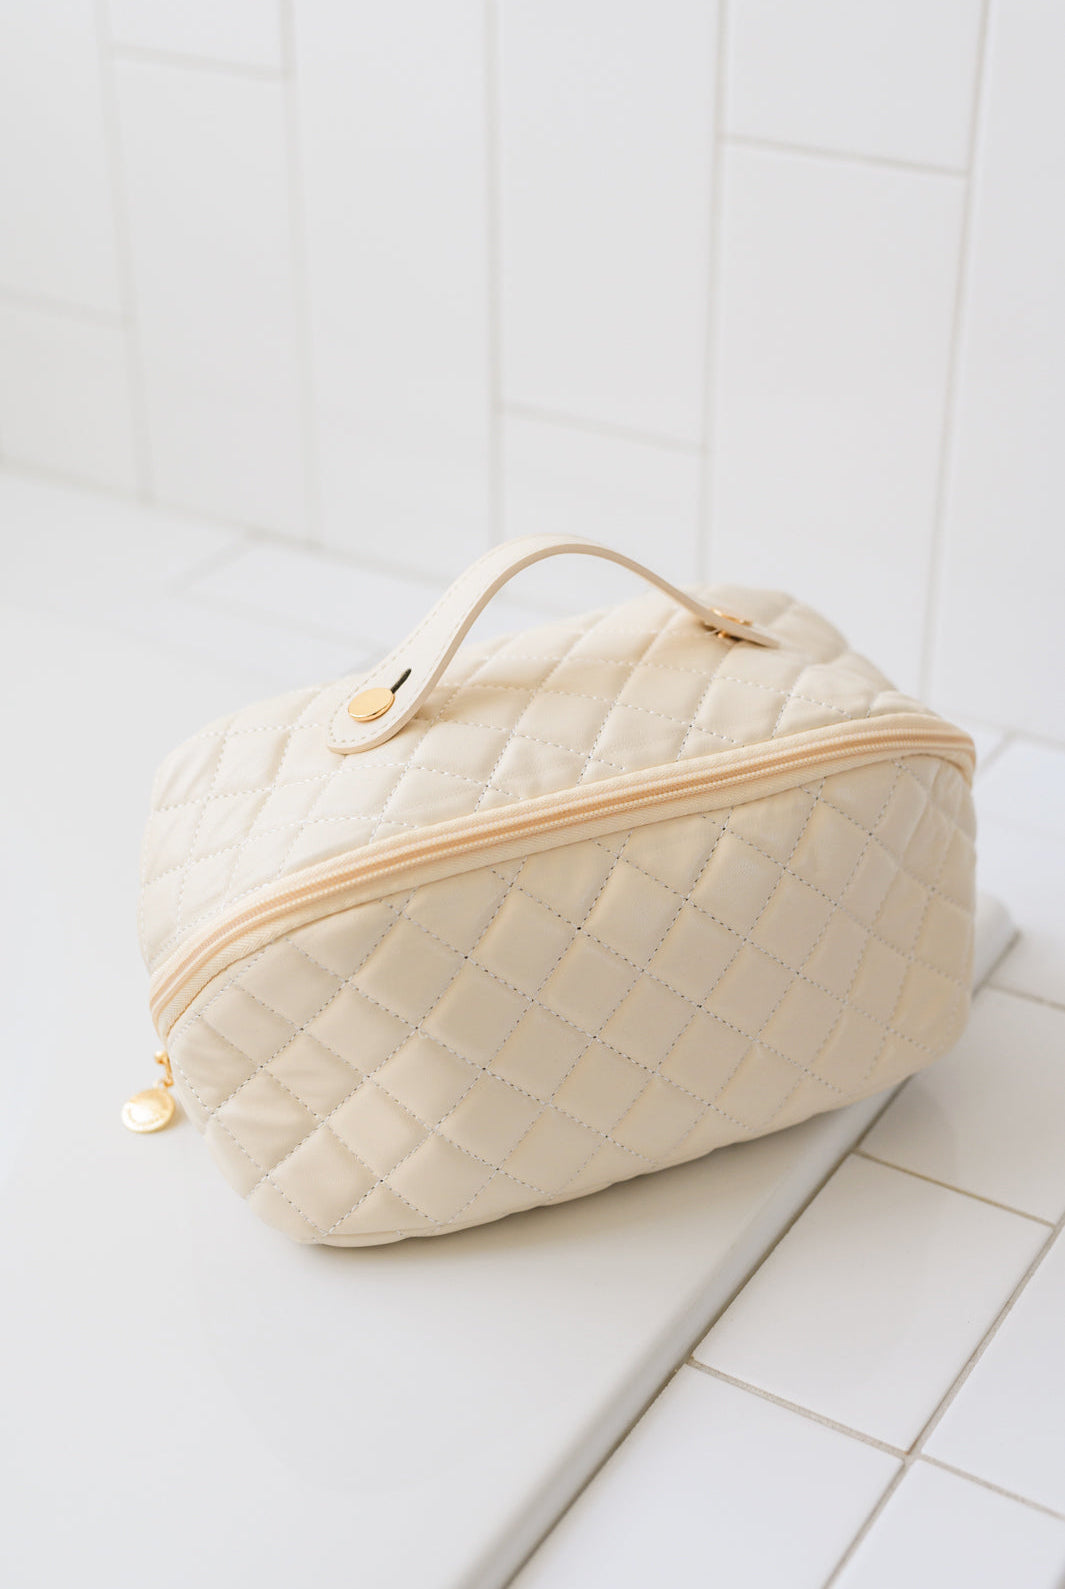 Large Capacity Quilted Makeup Bag in Cream-Handbags-Ave Shops-Urban Threadz Boutique, Women's Fashion Boutique in Saugatuck, MI